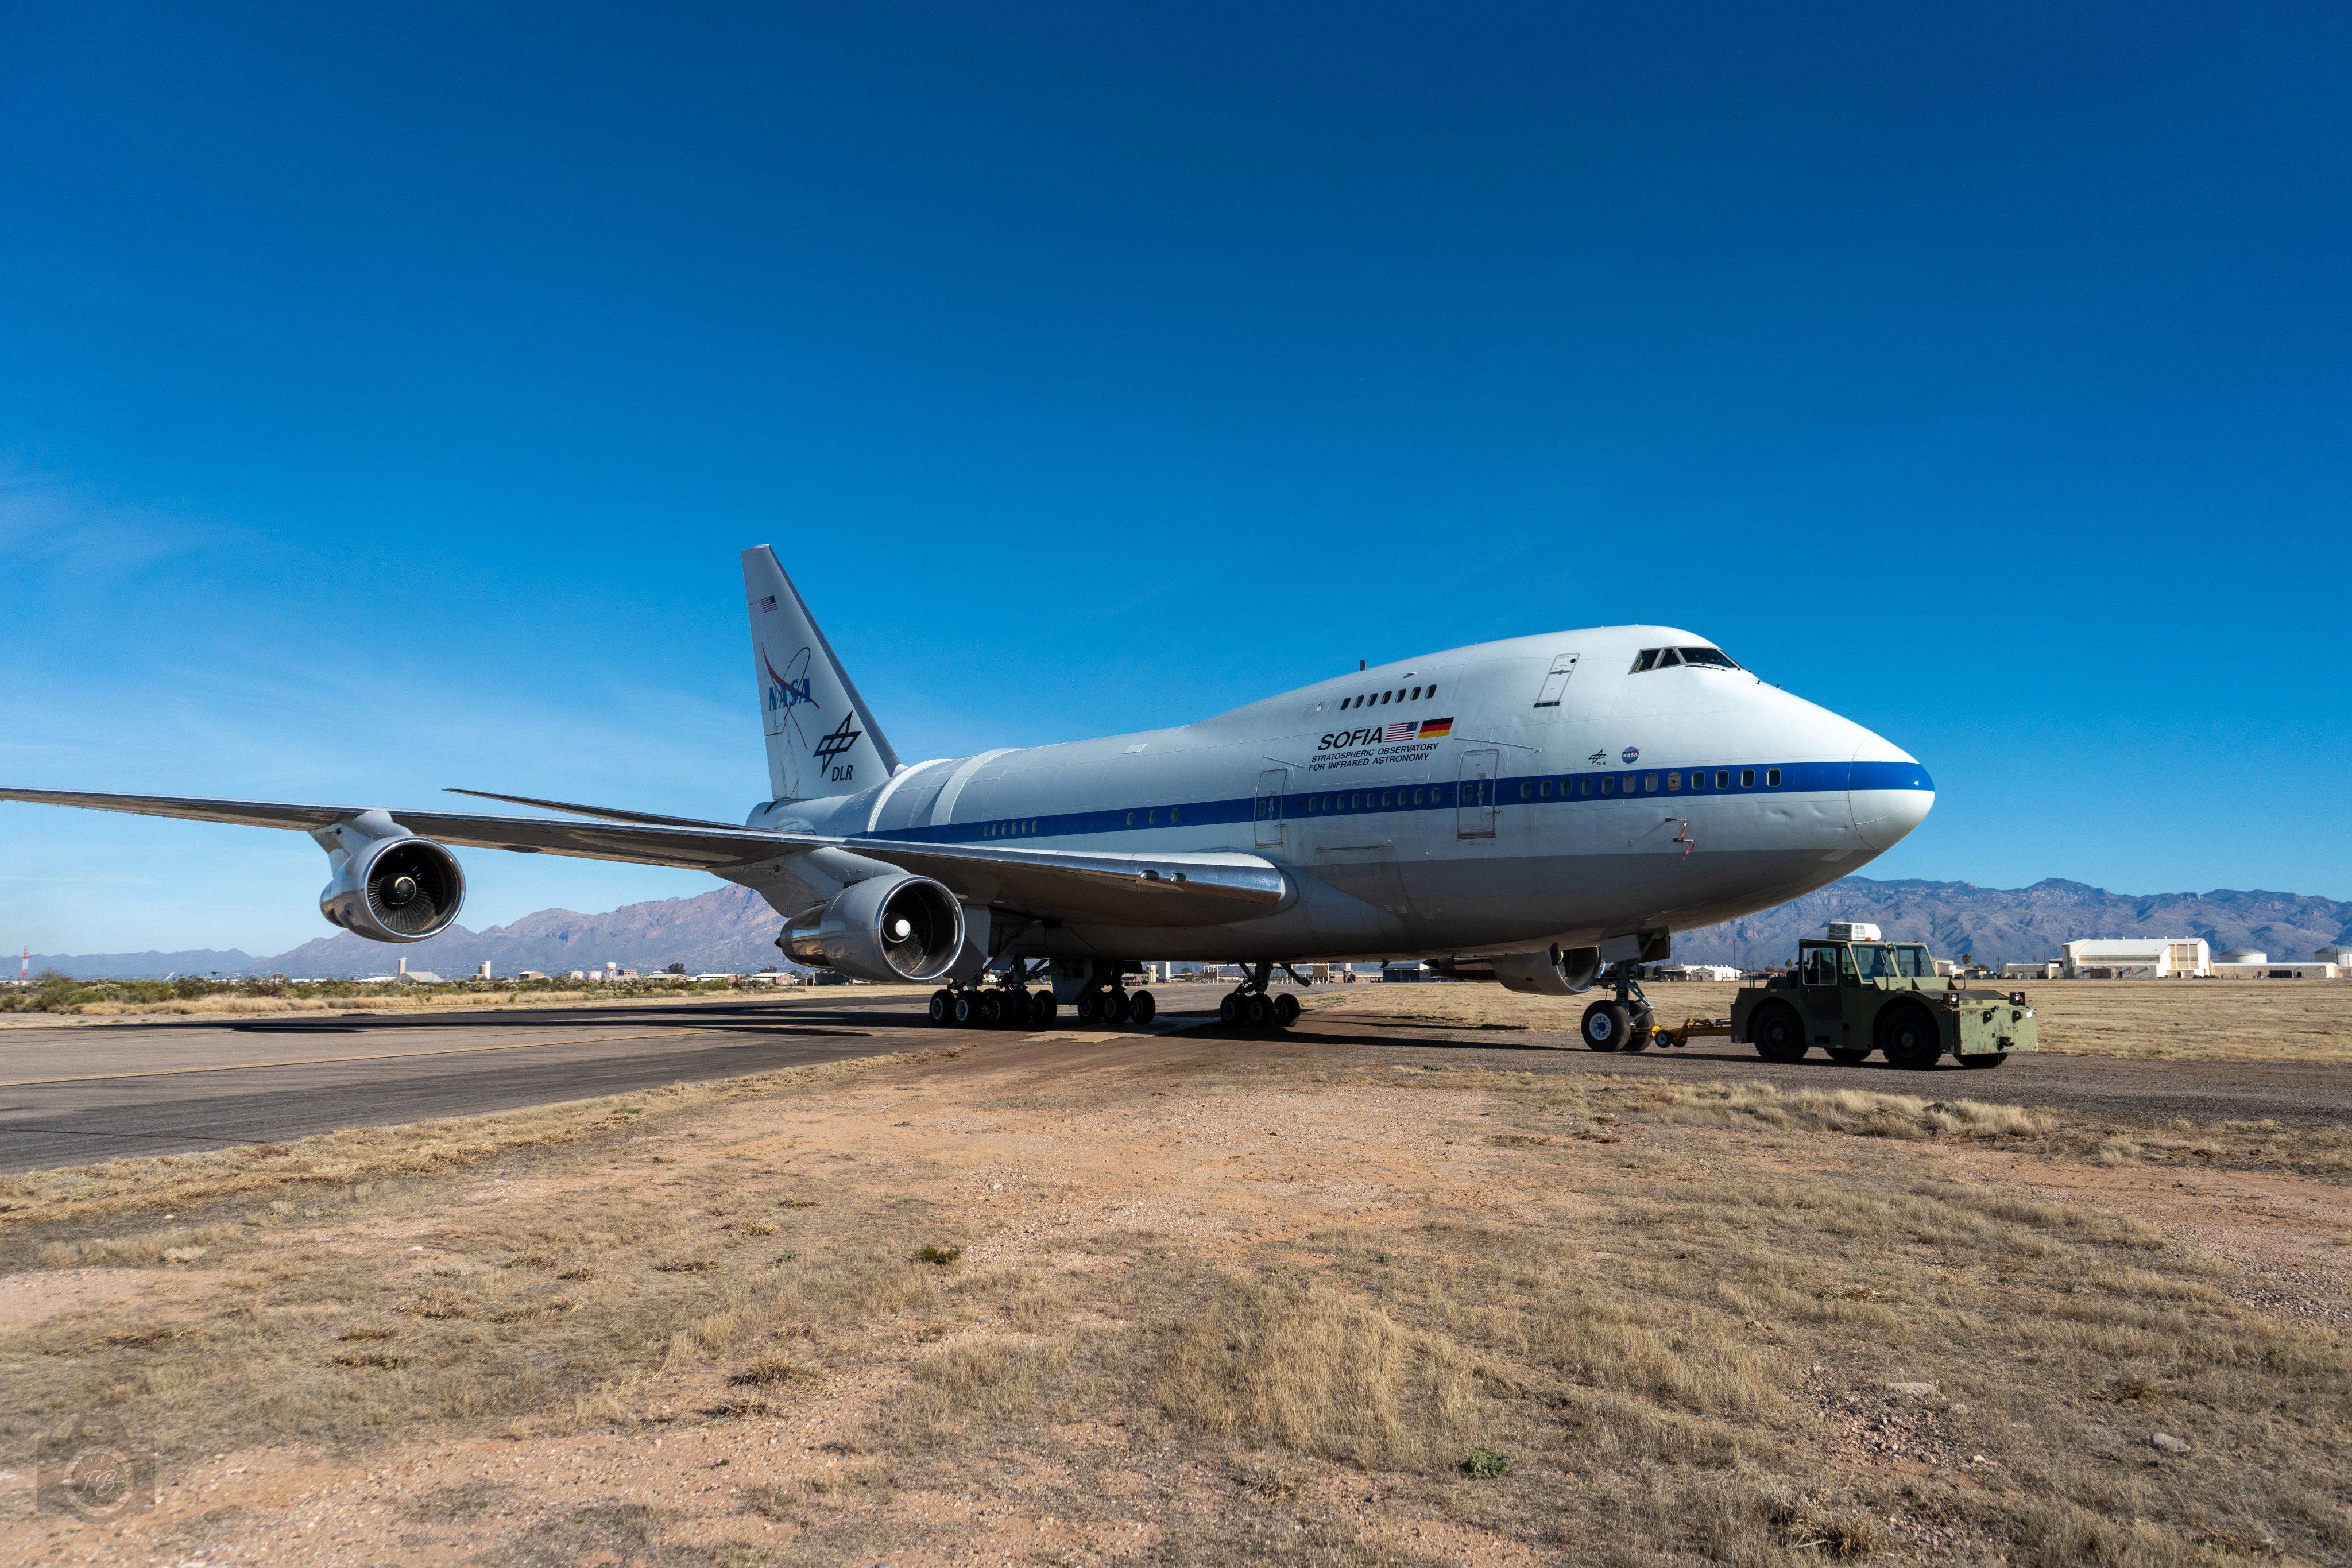 NASA's Boeing 747 SOFIA aircraft being towed at Tucson’s Davis-Monthan Air Force Base.